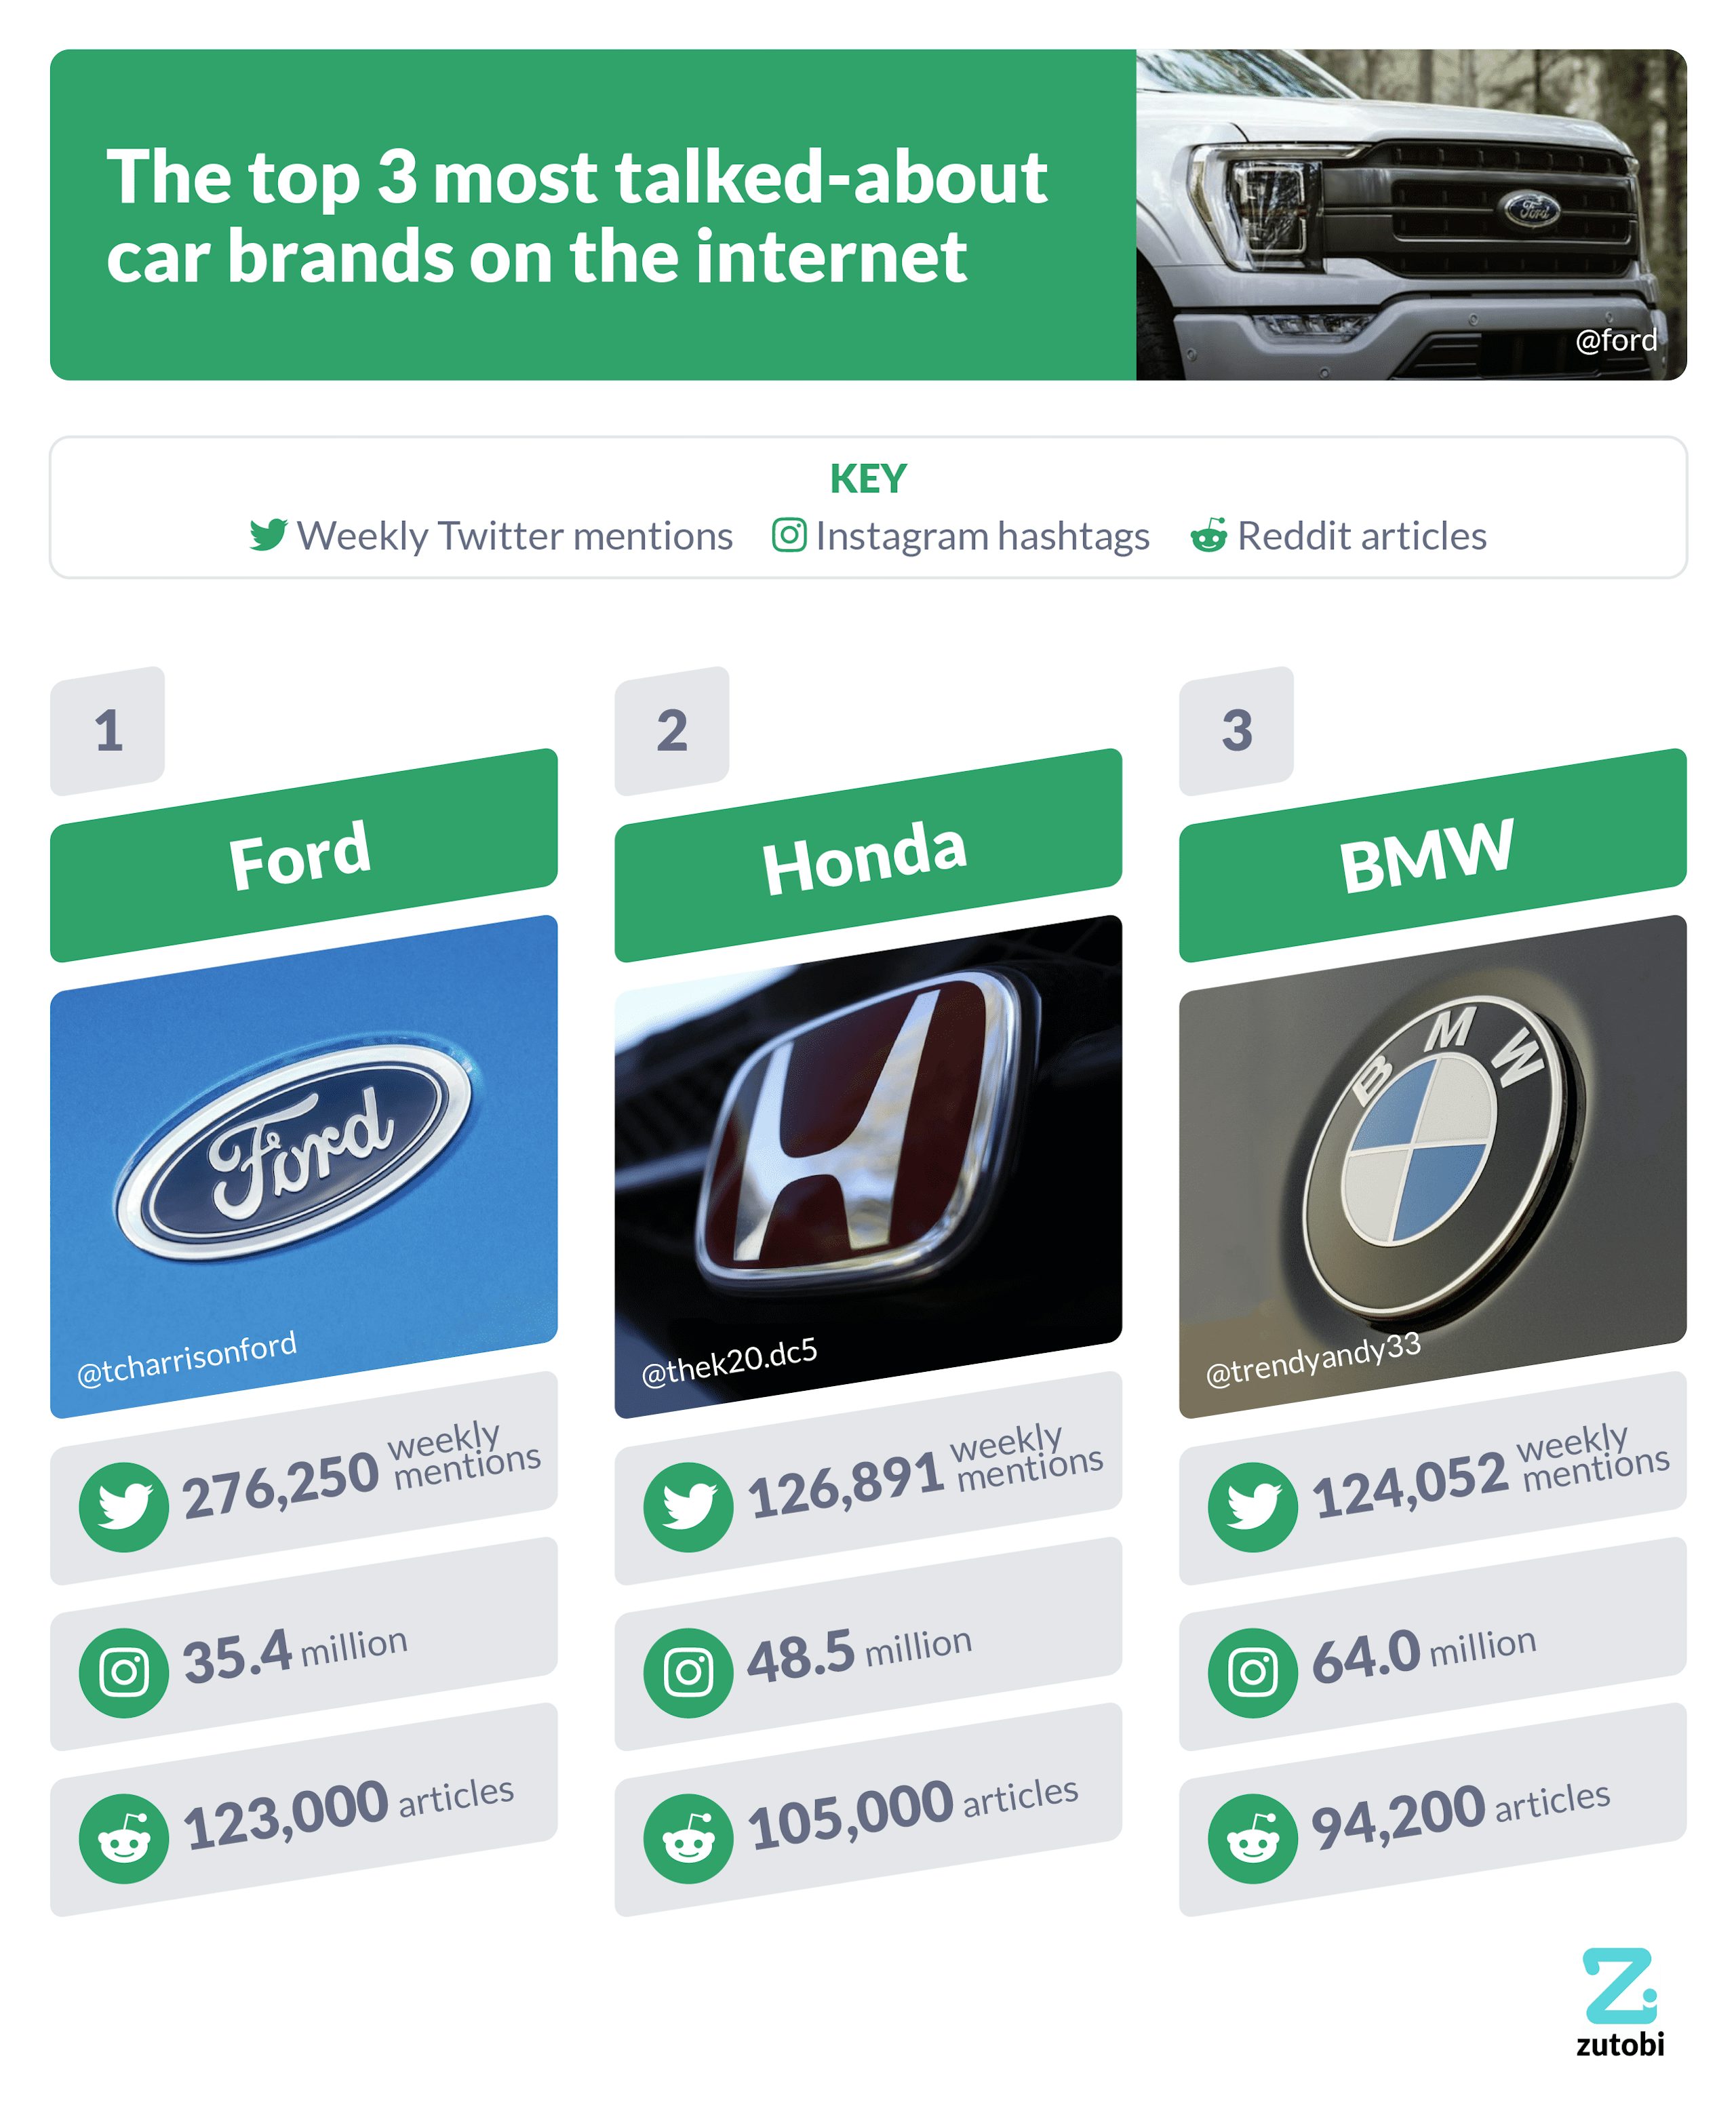 The most talked-about car brands on the internet